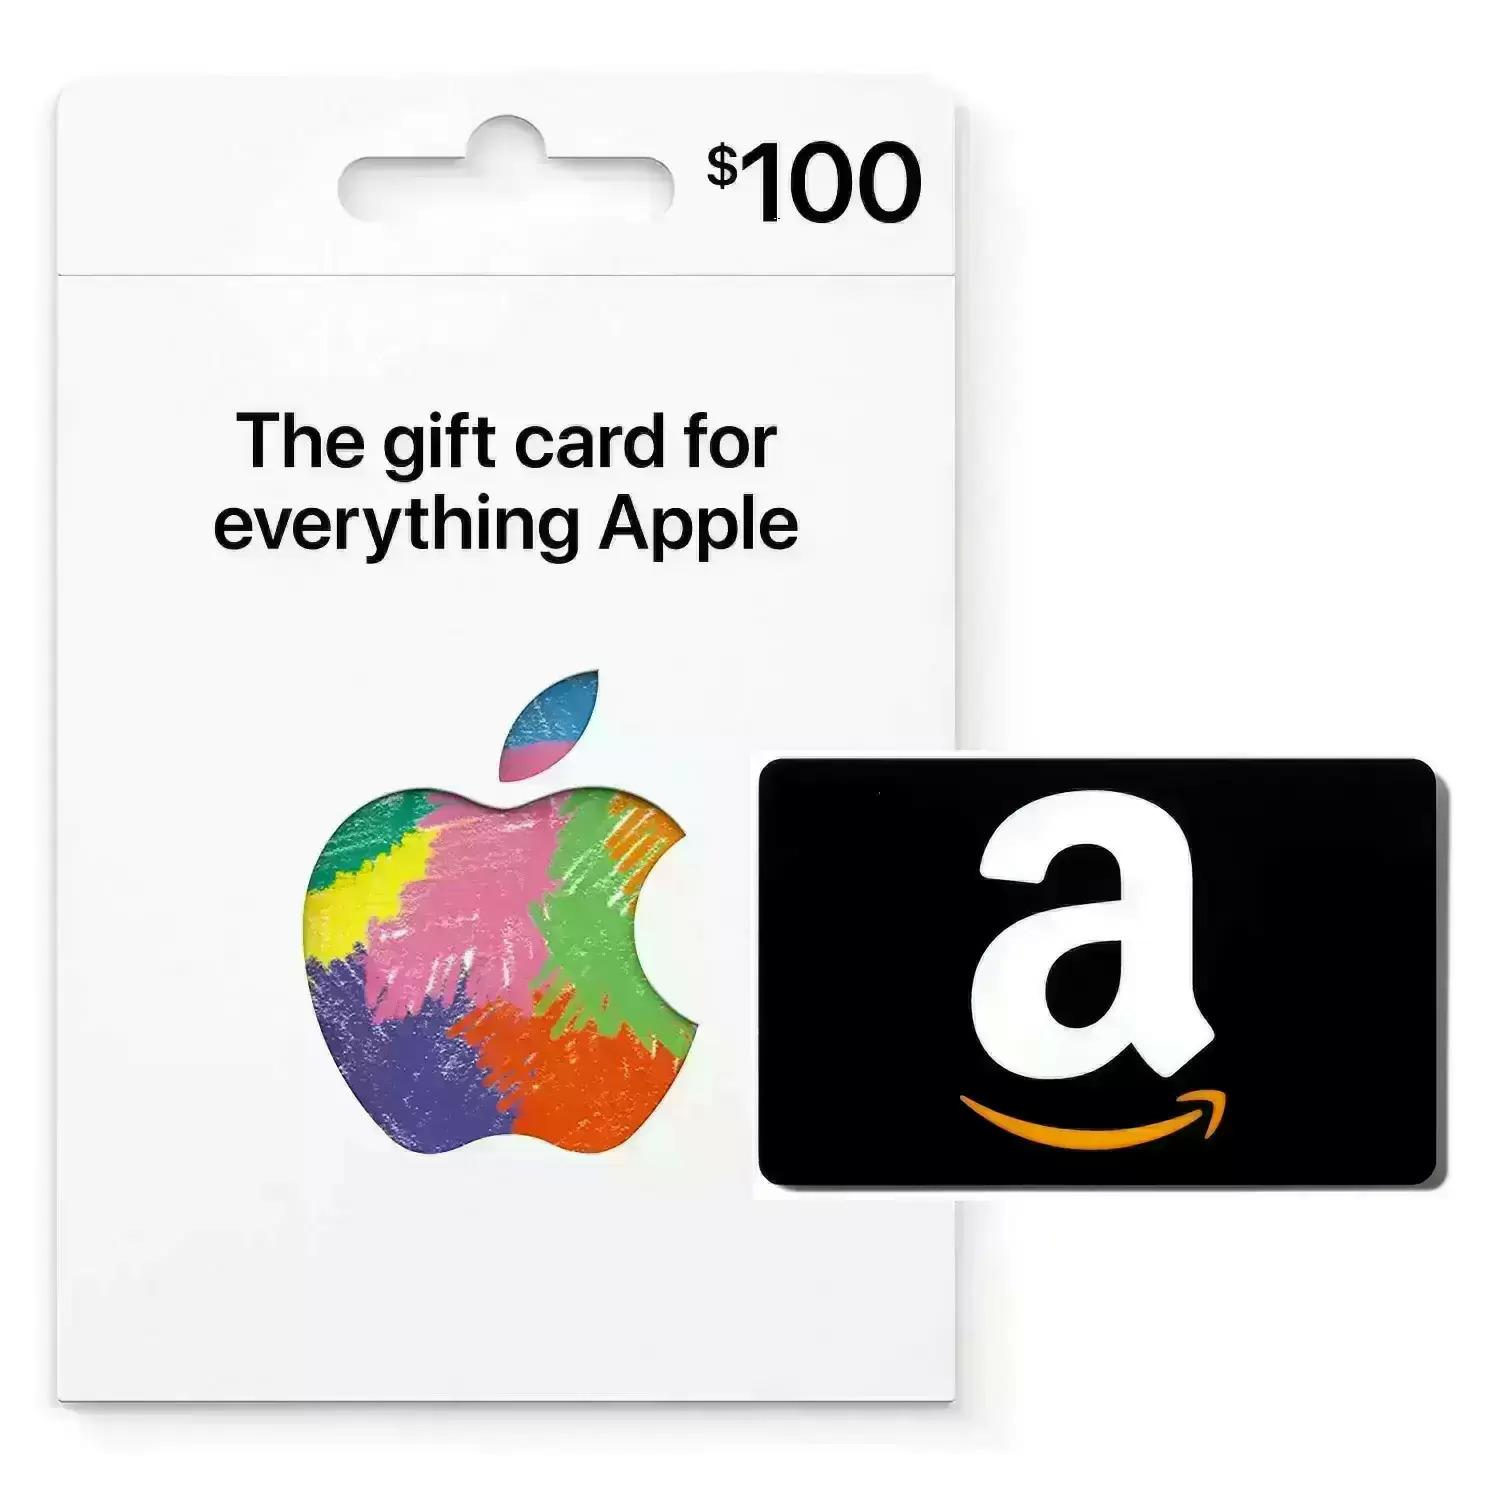 $100 Apple Gift Card with $10 Amazon Gift Card for $100